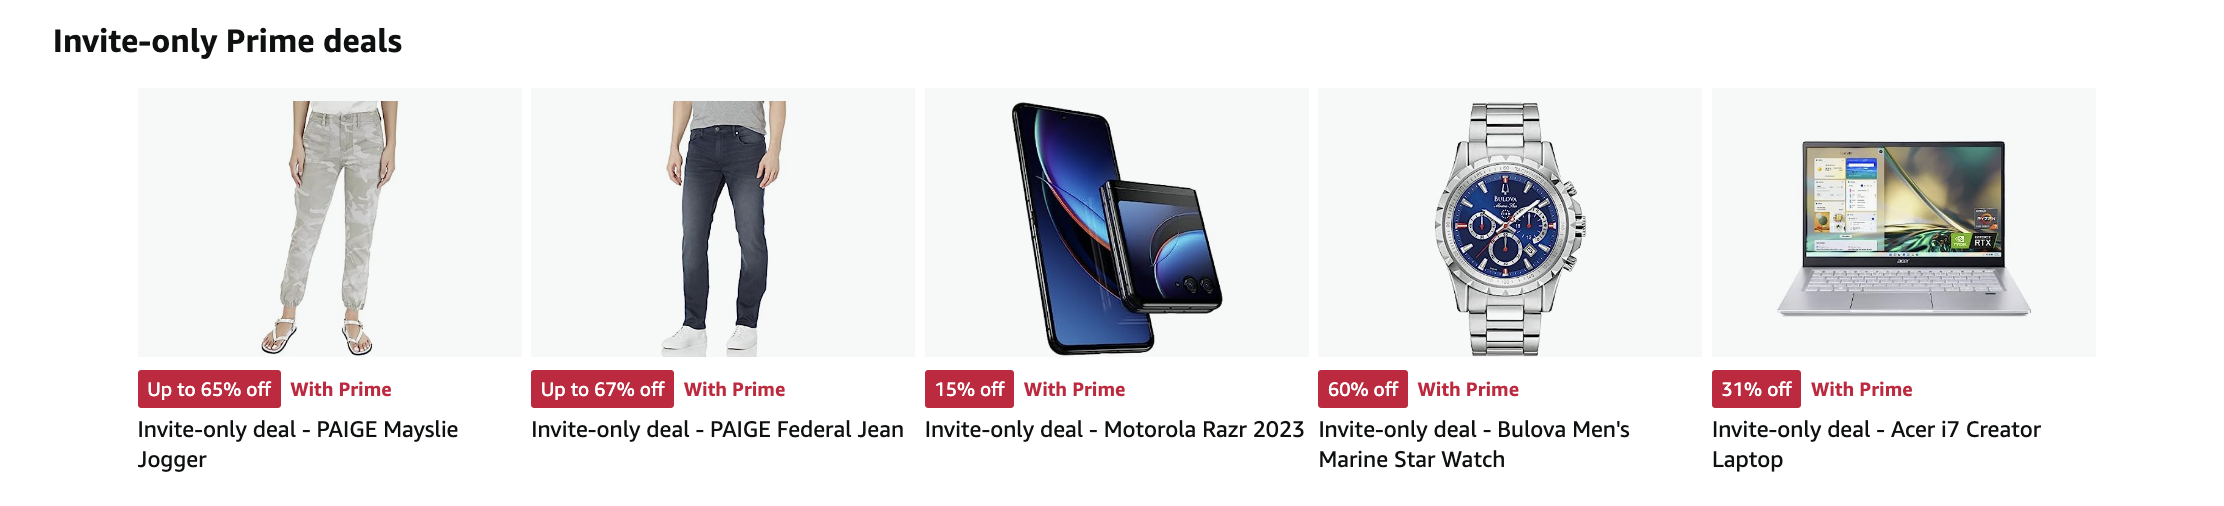 prime-day-invite-only-deals